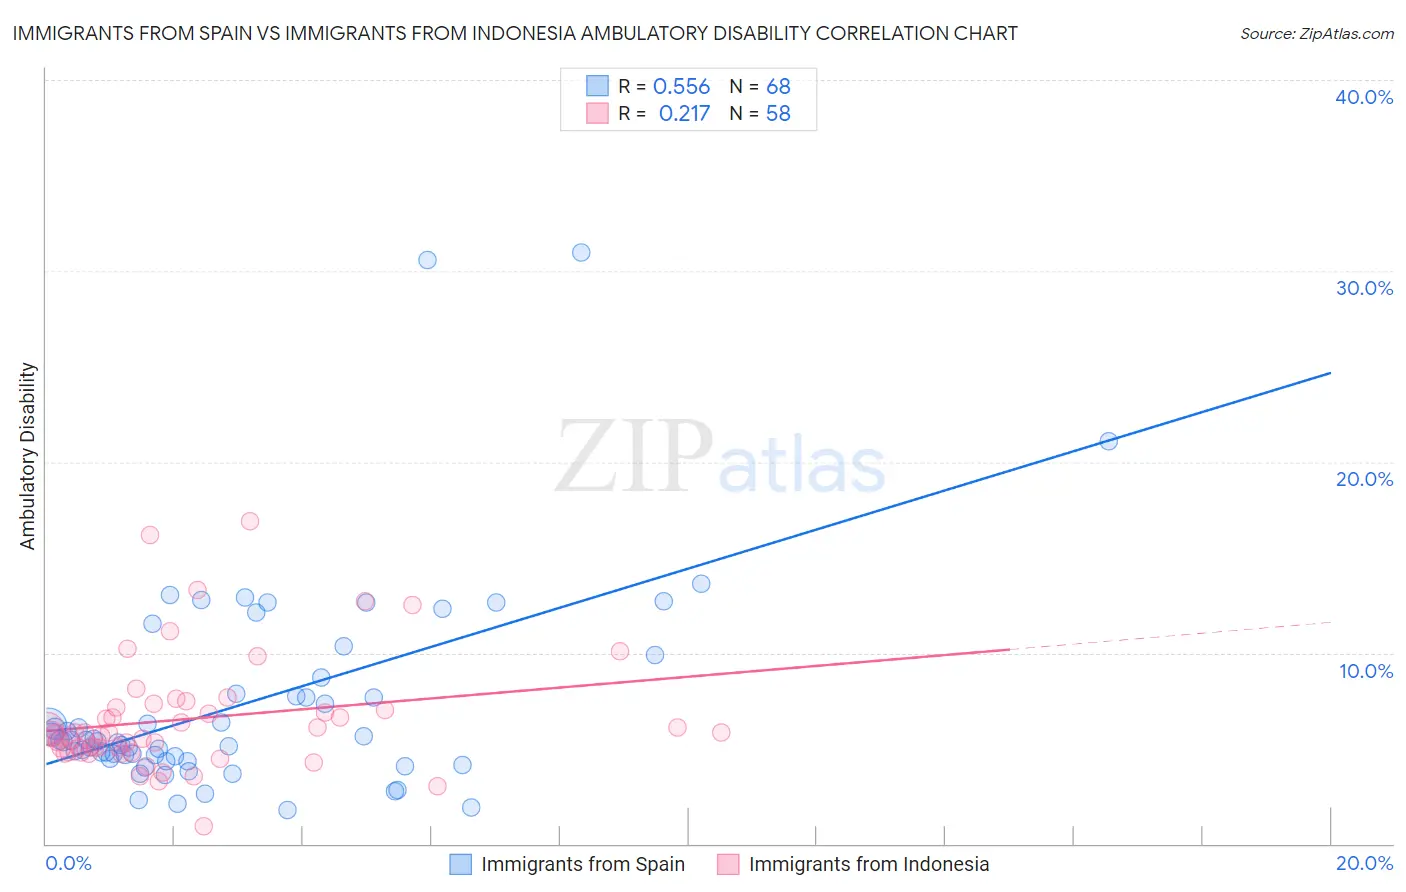 Immigrants from Spain vs Immigrants from Indonesia Ambulatory Disability